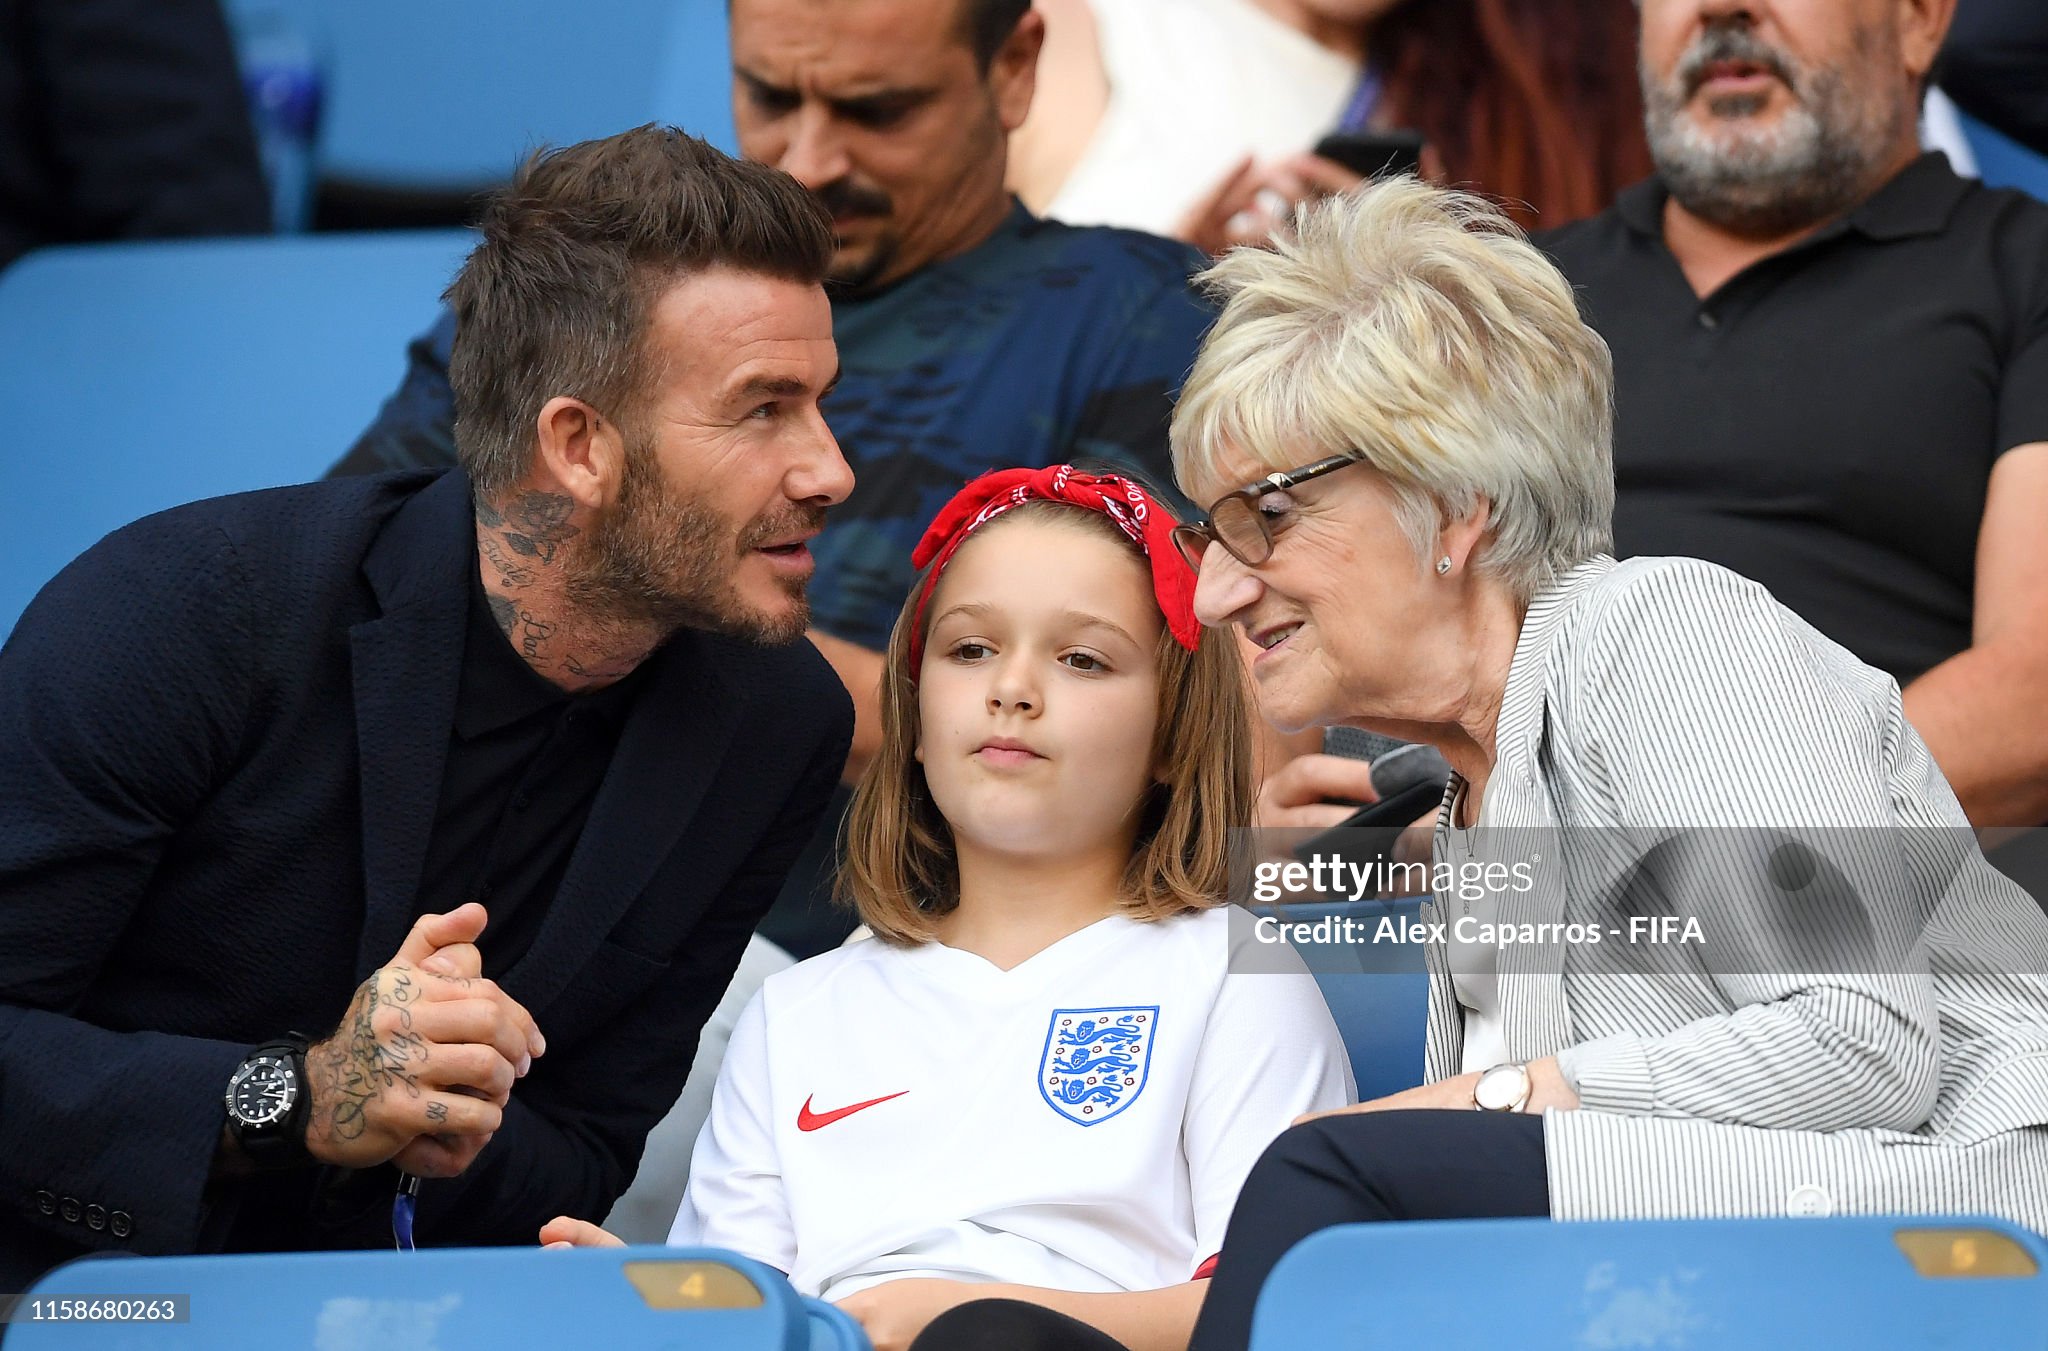 gettyimages-1158680263-2048x2048.jpg